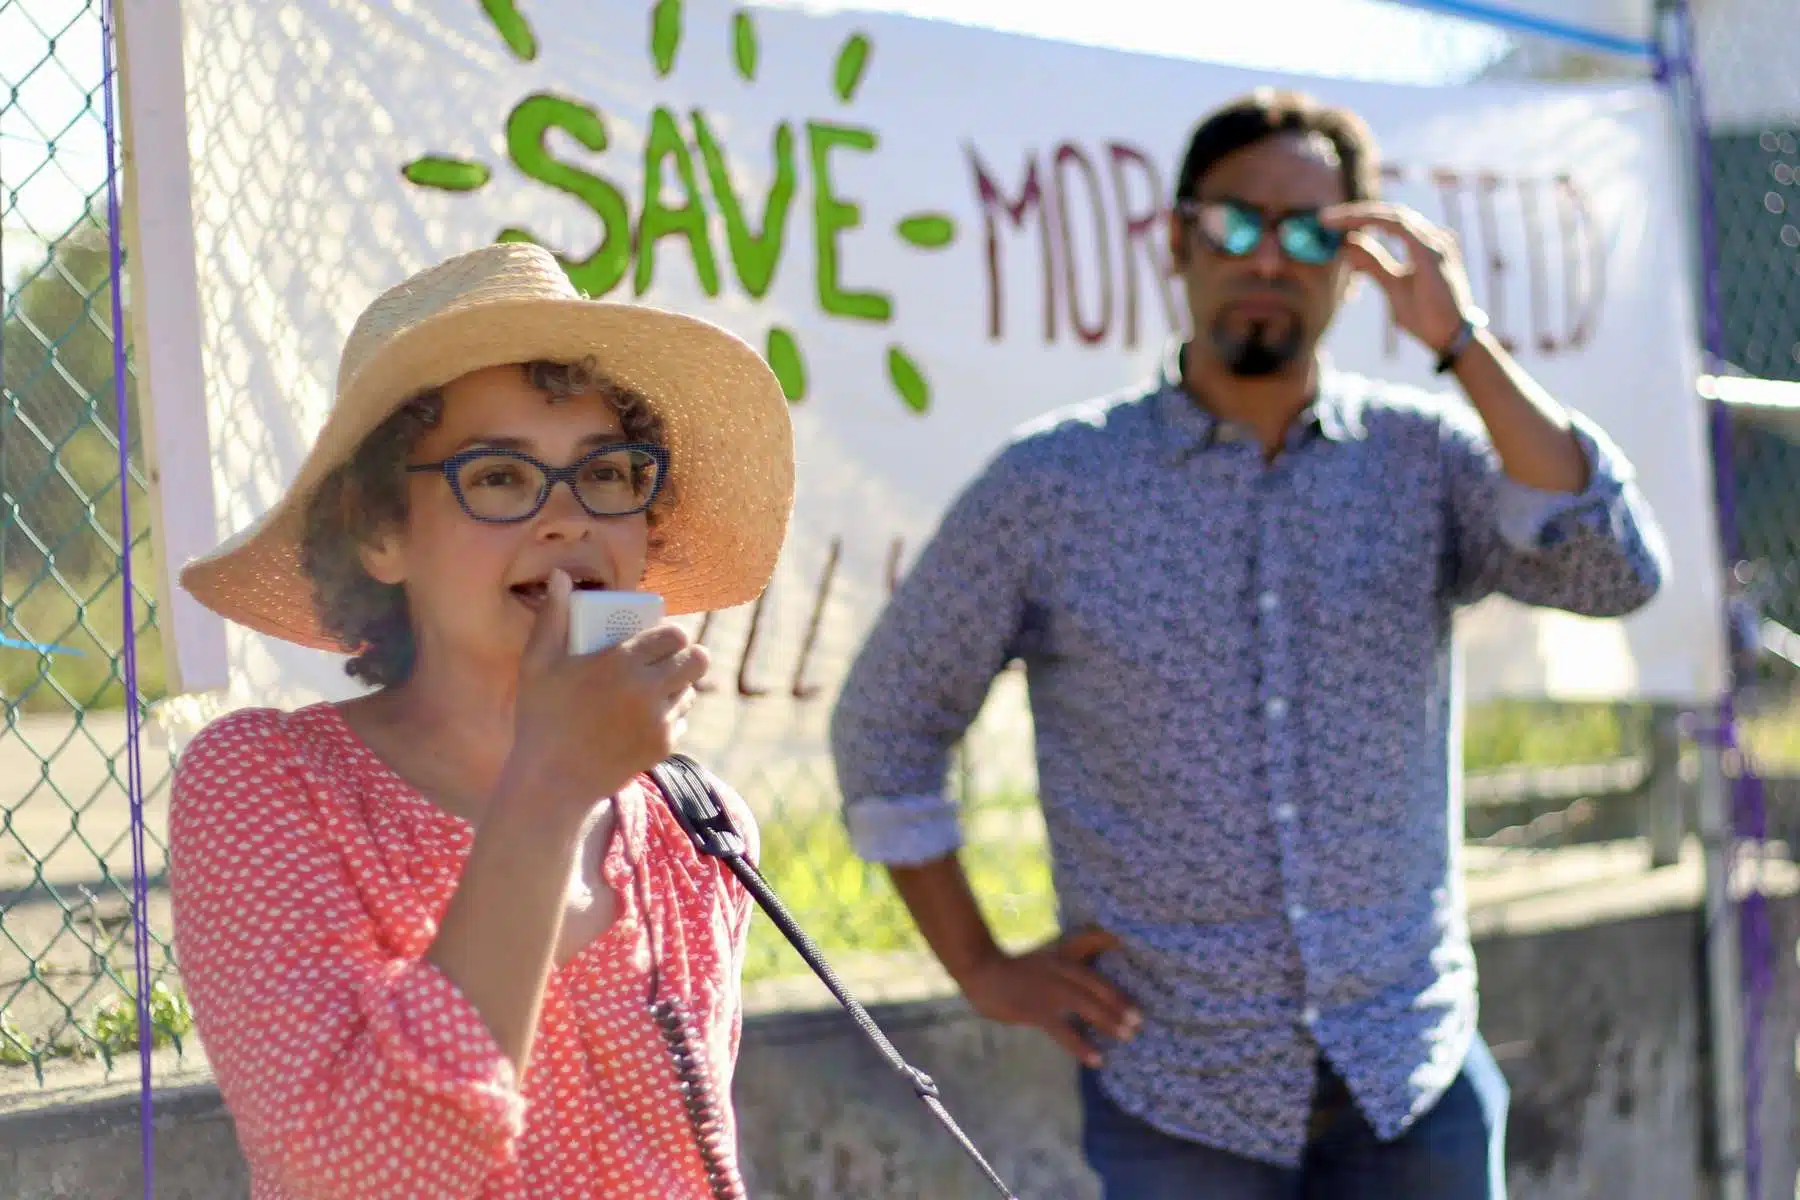 Rally to save Morley Field shows opposition to paving greenspace gaining momentum